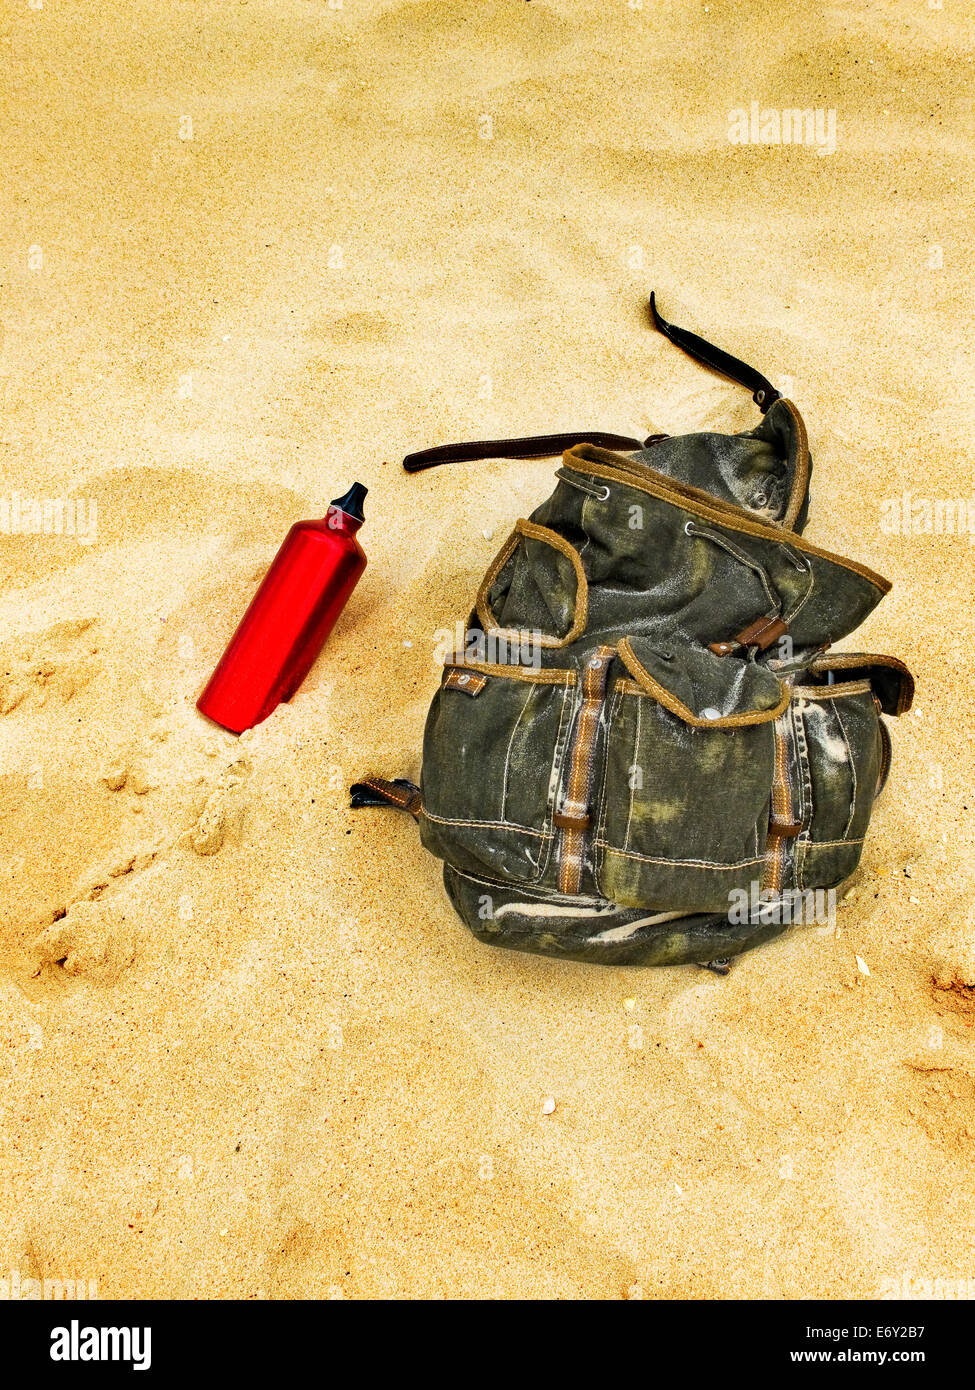 Backpack and canteen water bottle in the sand of a beach. Backpacking traveller taking a break. Stock Photo